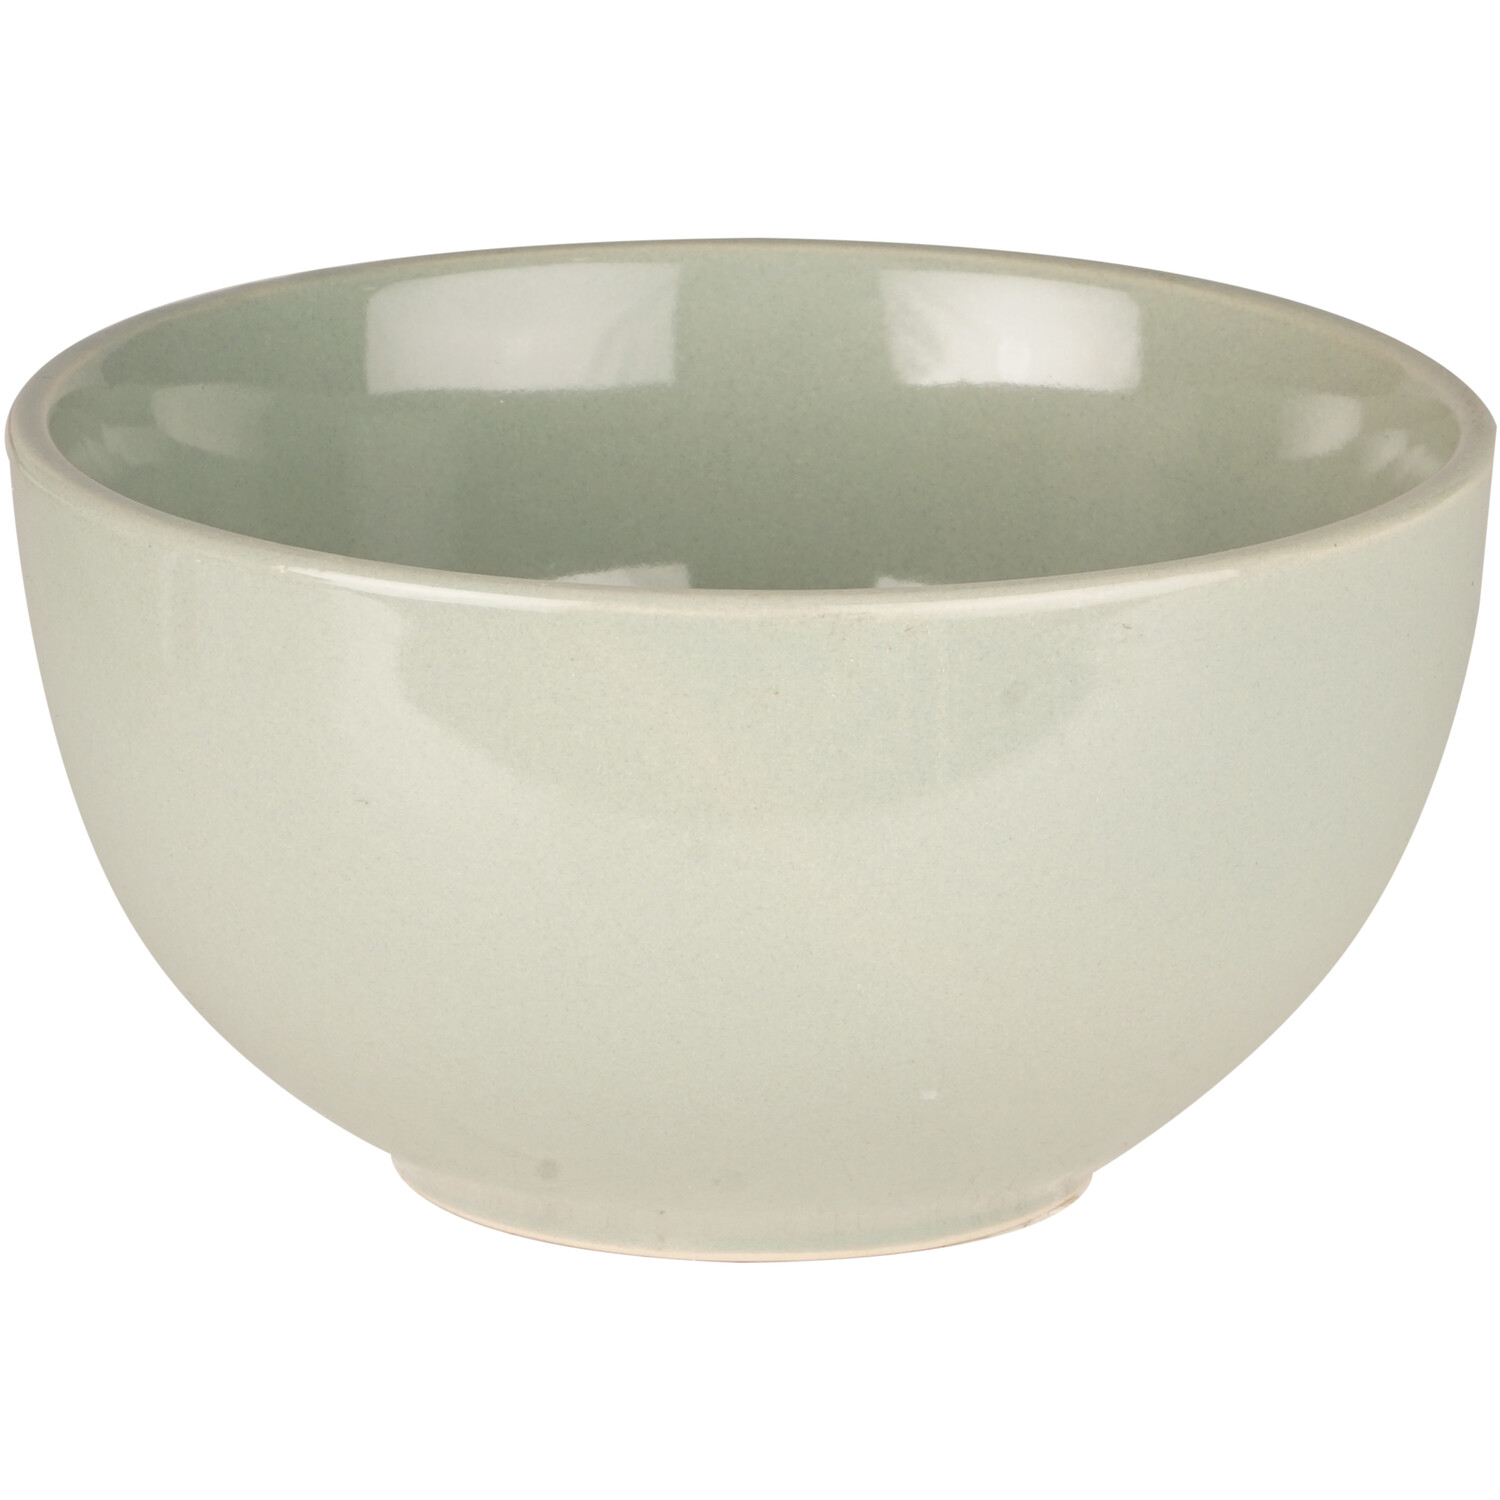 Vancouver 5.5" Rice Bowl - Green Image